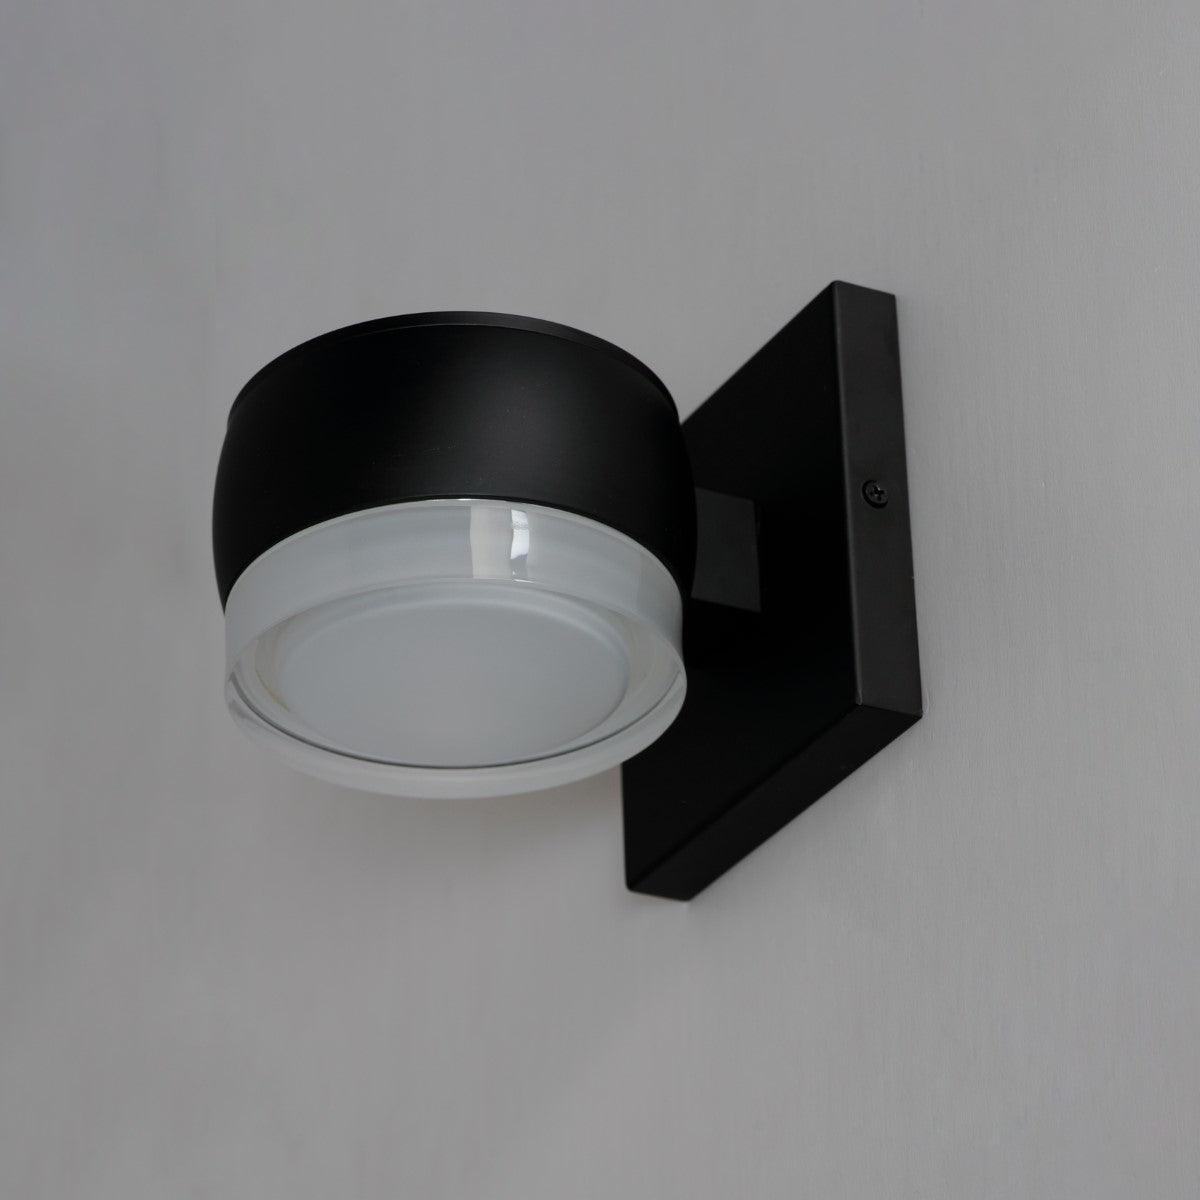 Modular 5 in. LED Outdoor Wall Sconce 3000K Black Finish